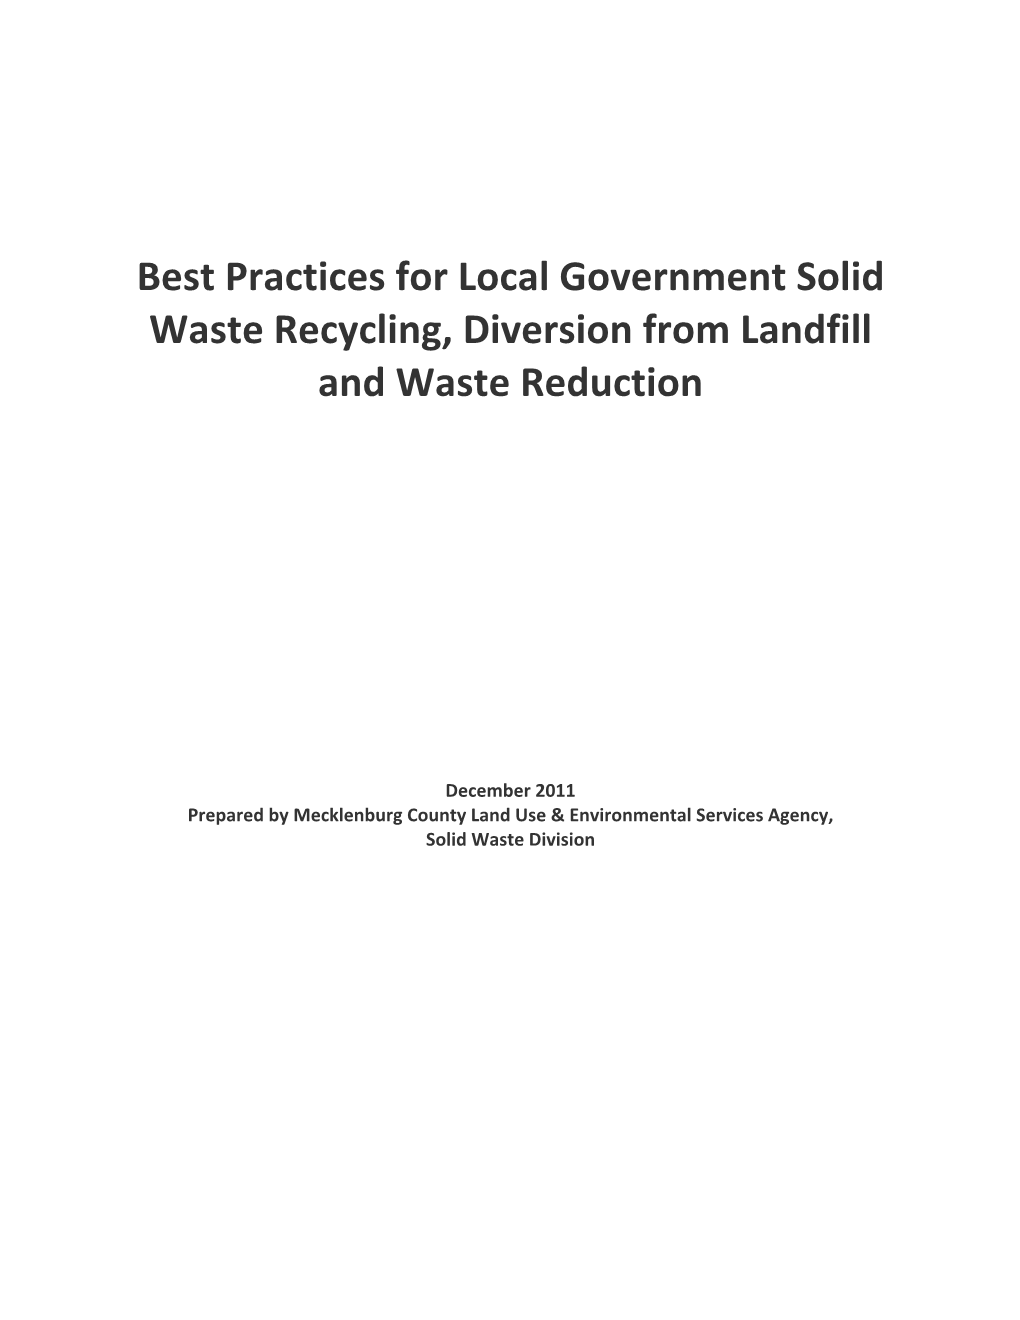 Best Practices for Local Government Solid Waste Recycling, Diversion from Landfill and Waste Reduction